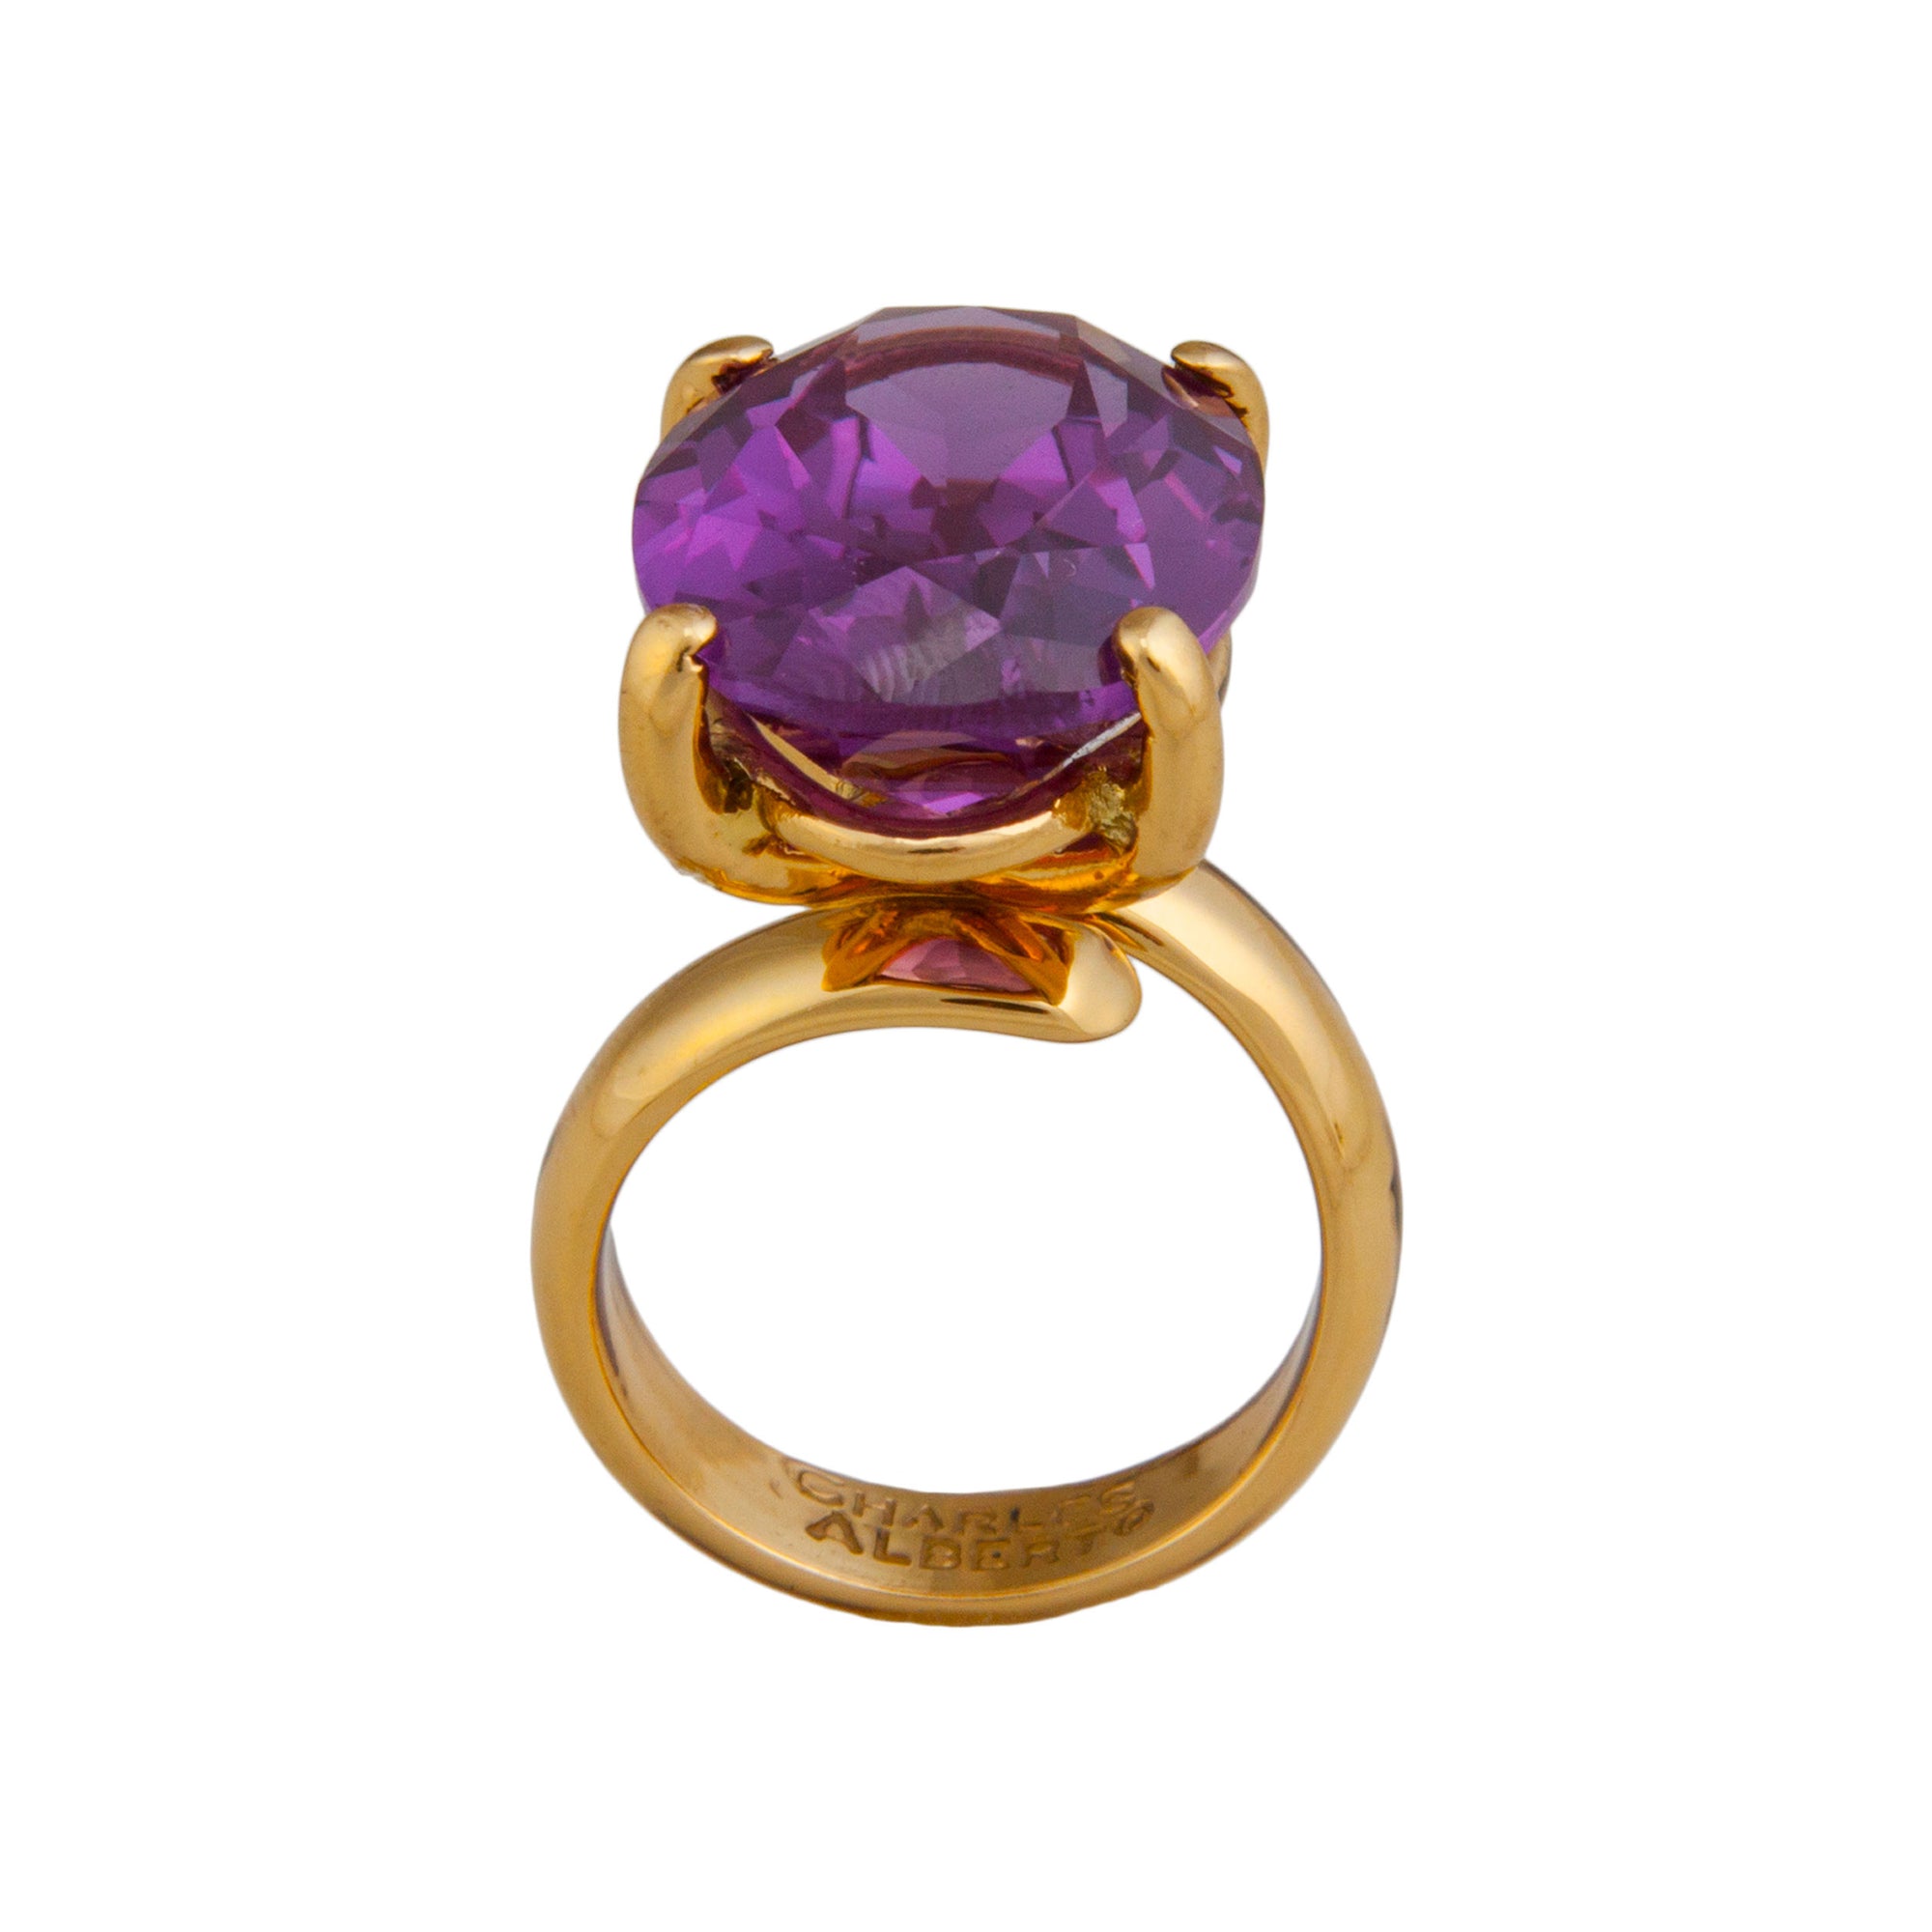 Charles Albert Jewelry - Alchemia Amethyst Prong Adjustable Ring - Front View